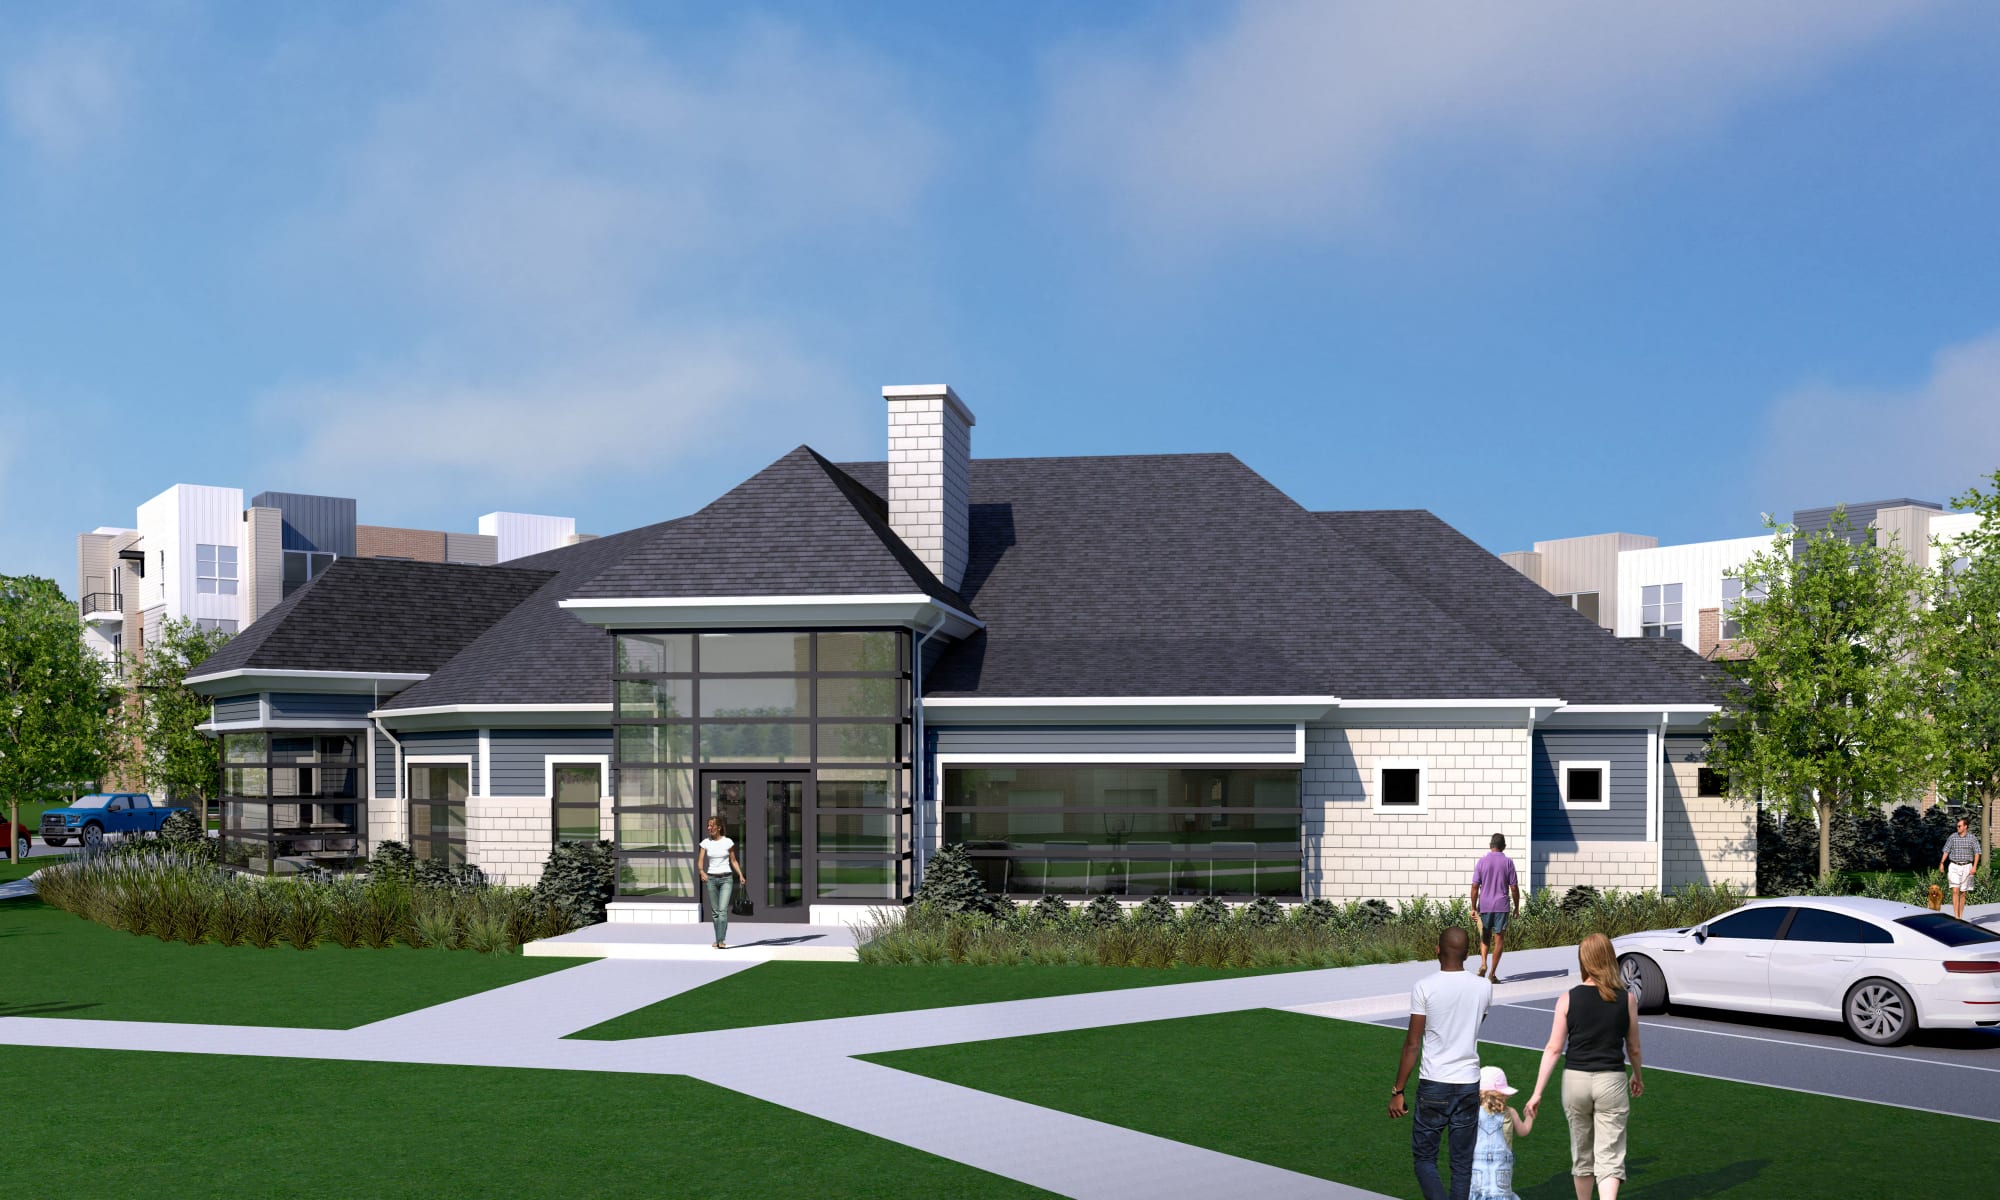 Rendering of the exterior of the leasing office at Innova in Novi, Michigan